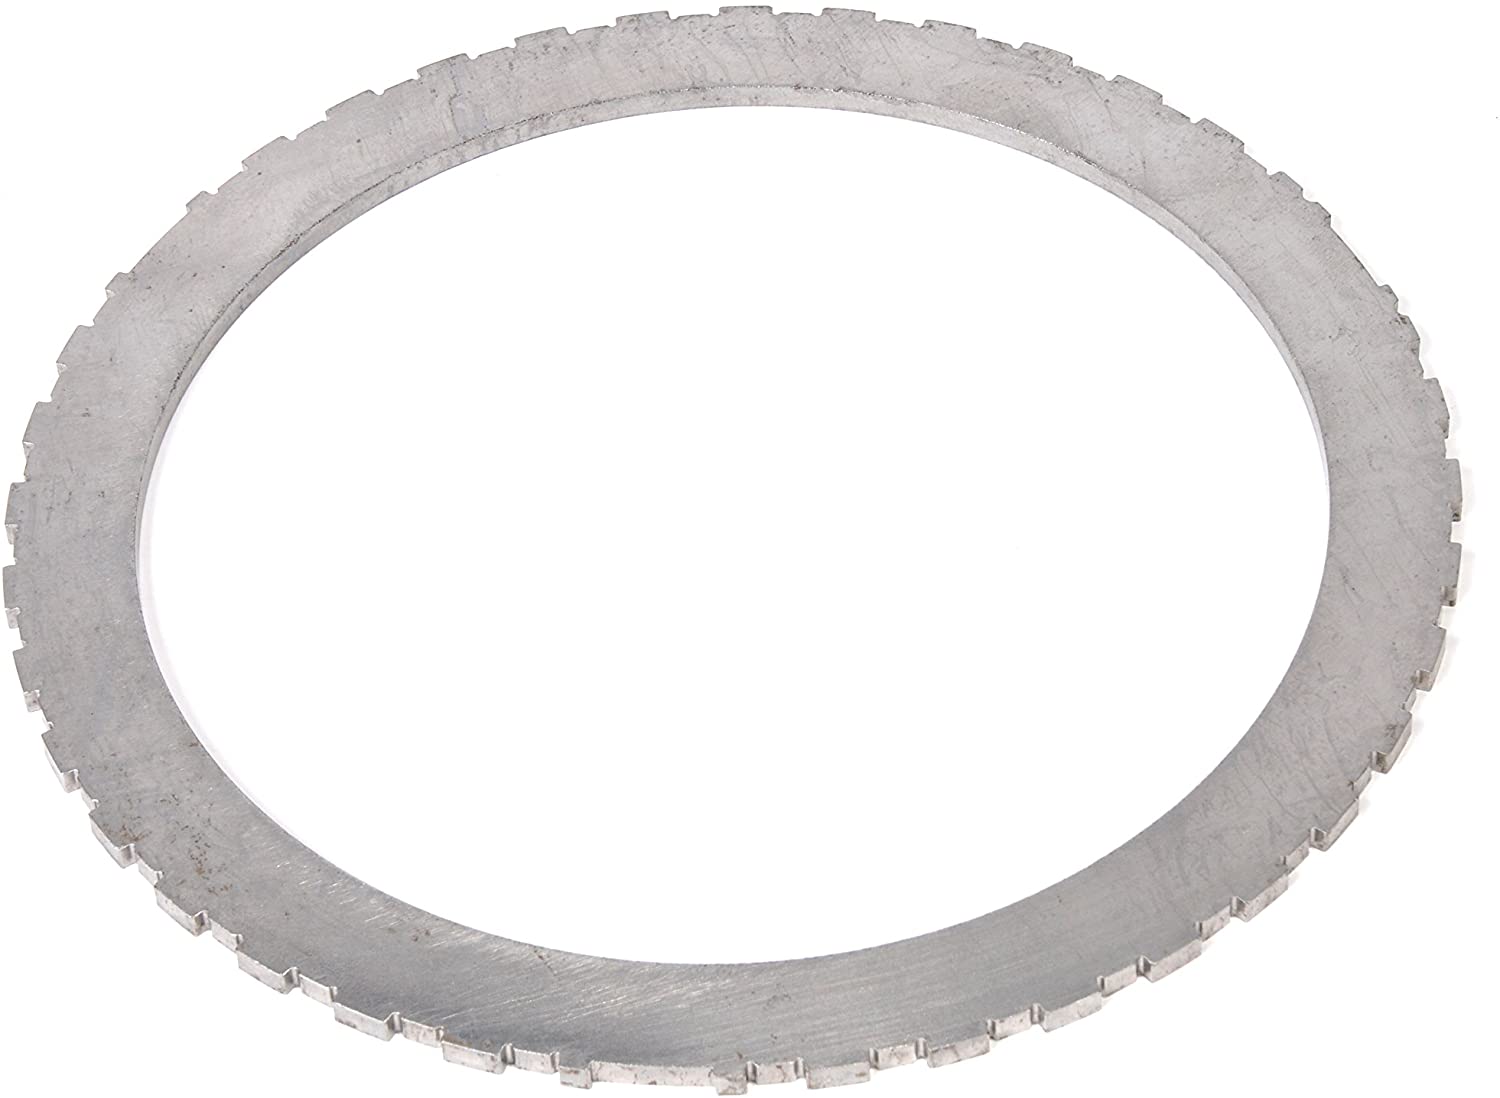 ACDelco 24276873 GM Original Equipment Automatic Transmission 1-2-3-4-5-6-Reverse Clutch Apply Plate